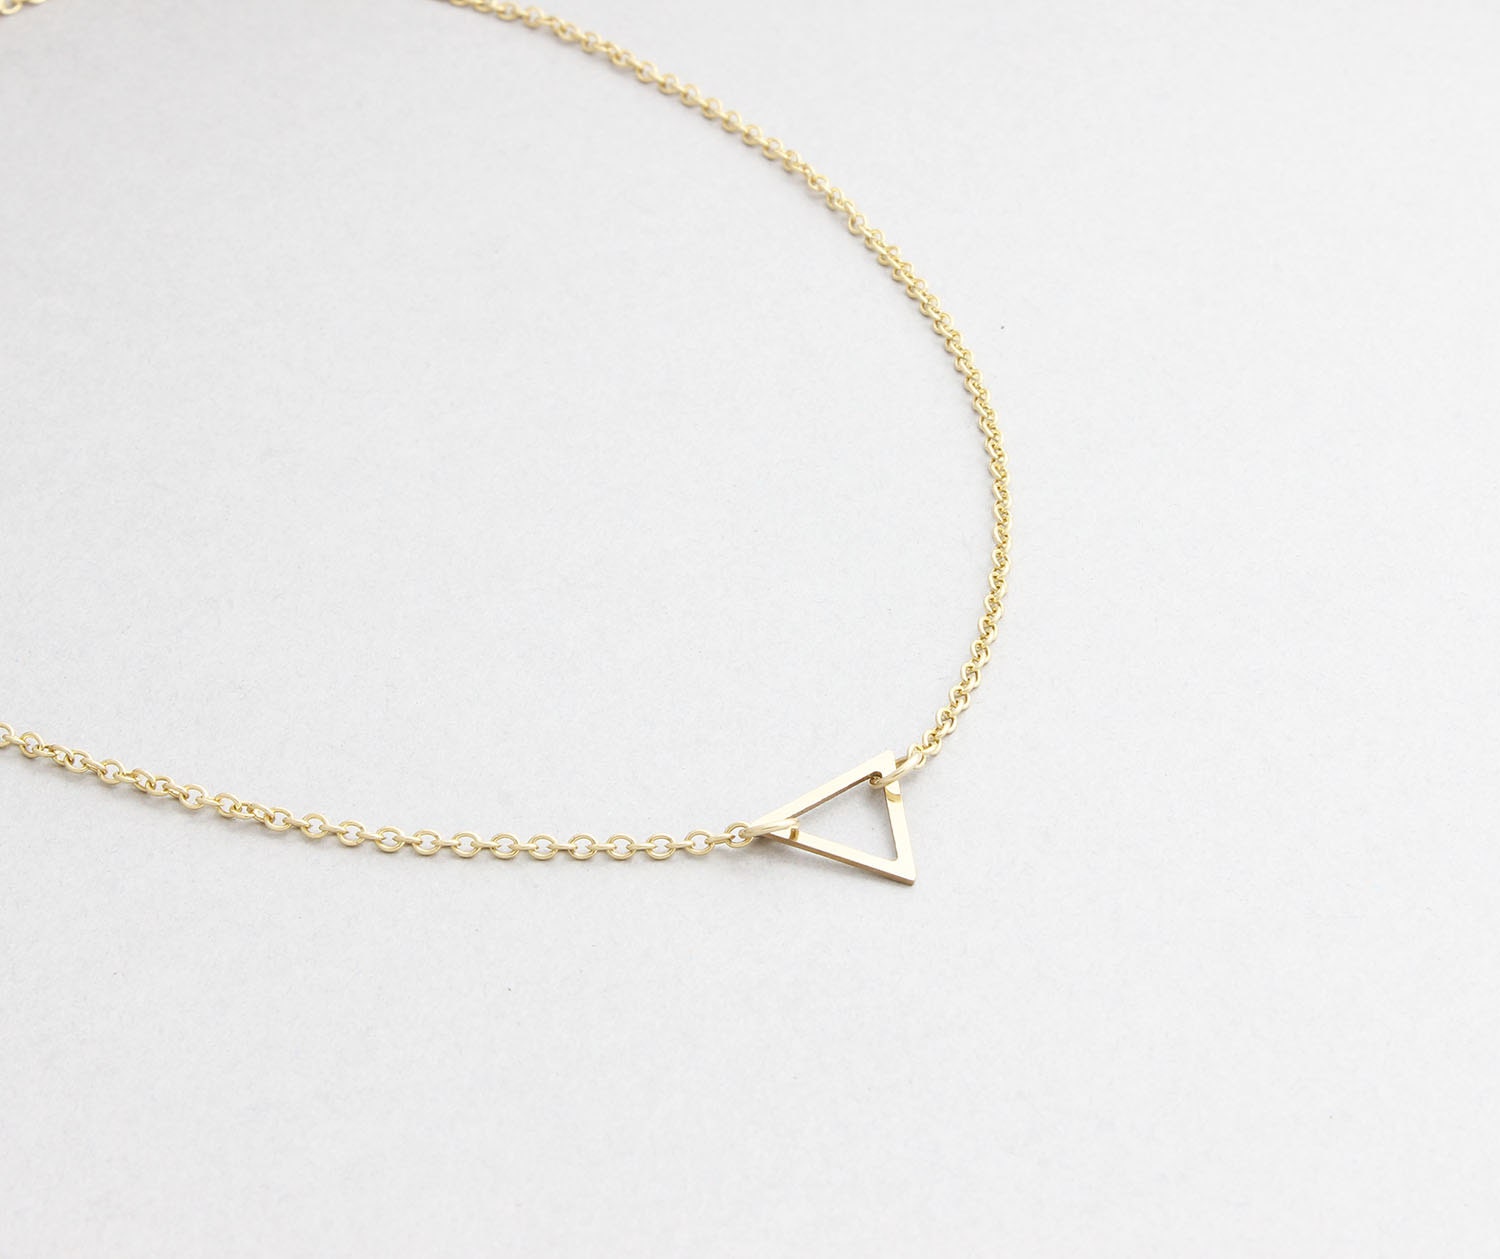 Gold filled tiny triangle necklace minimal delicate | Etsy